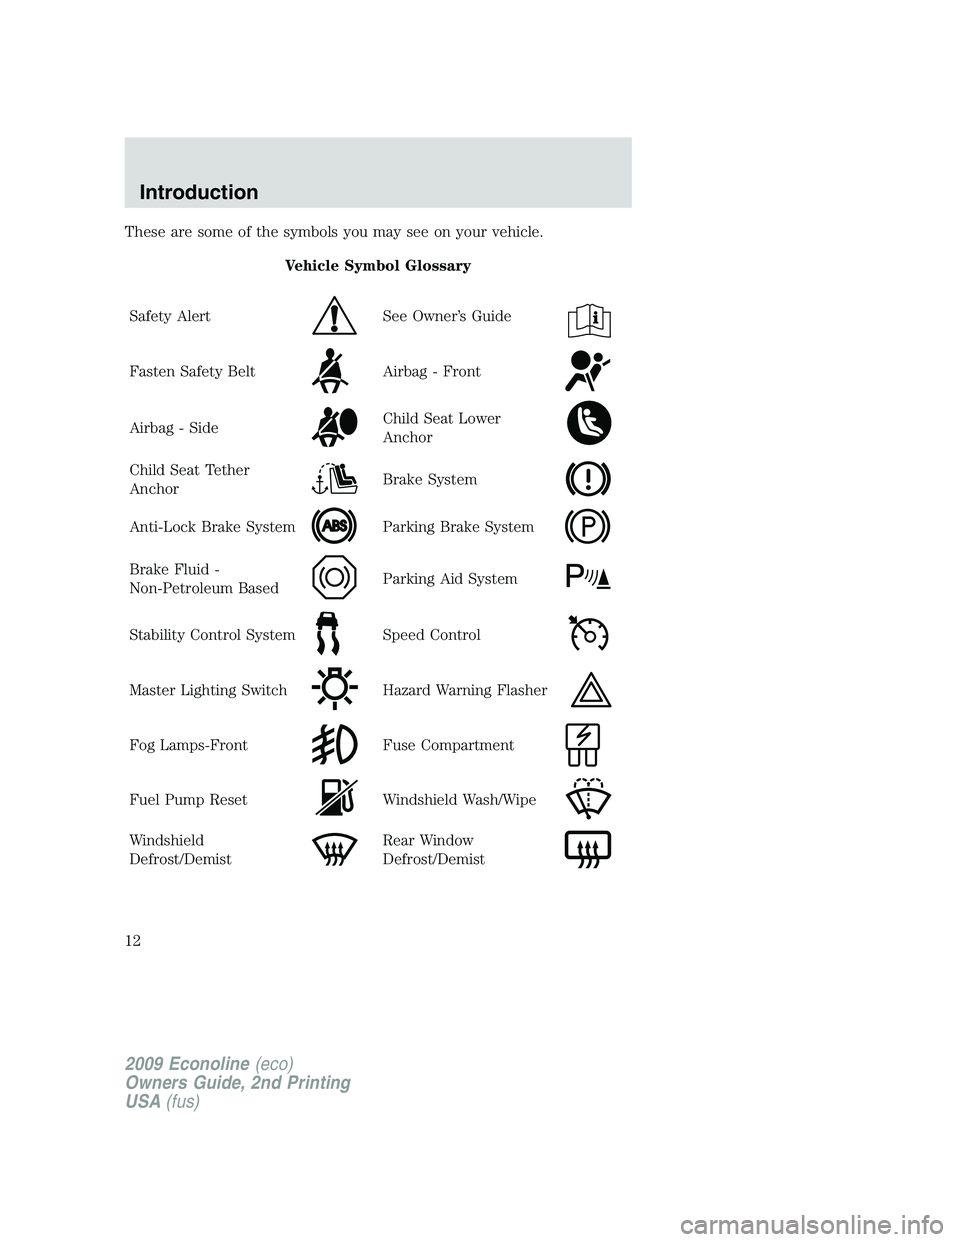 FORD E450 2009  Owners Manual These are some of the symbols you may see on your vehicle.
Vehicle Symbol Glossary
Safety Alert
See Owner’s Guide
Fasten Safety BeltAirbag - Front
Airbag - SideChild Seat Lower
Anchor
Child Seat Tet